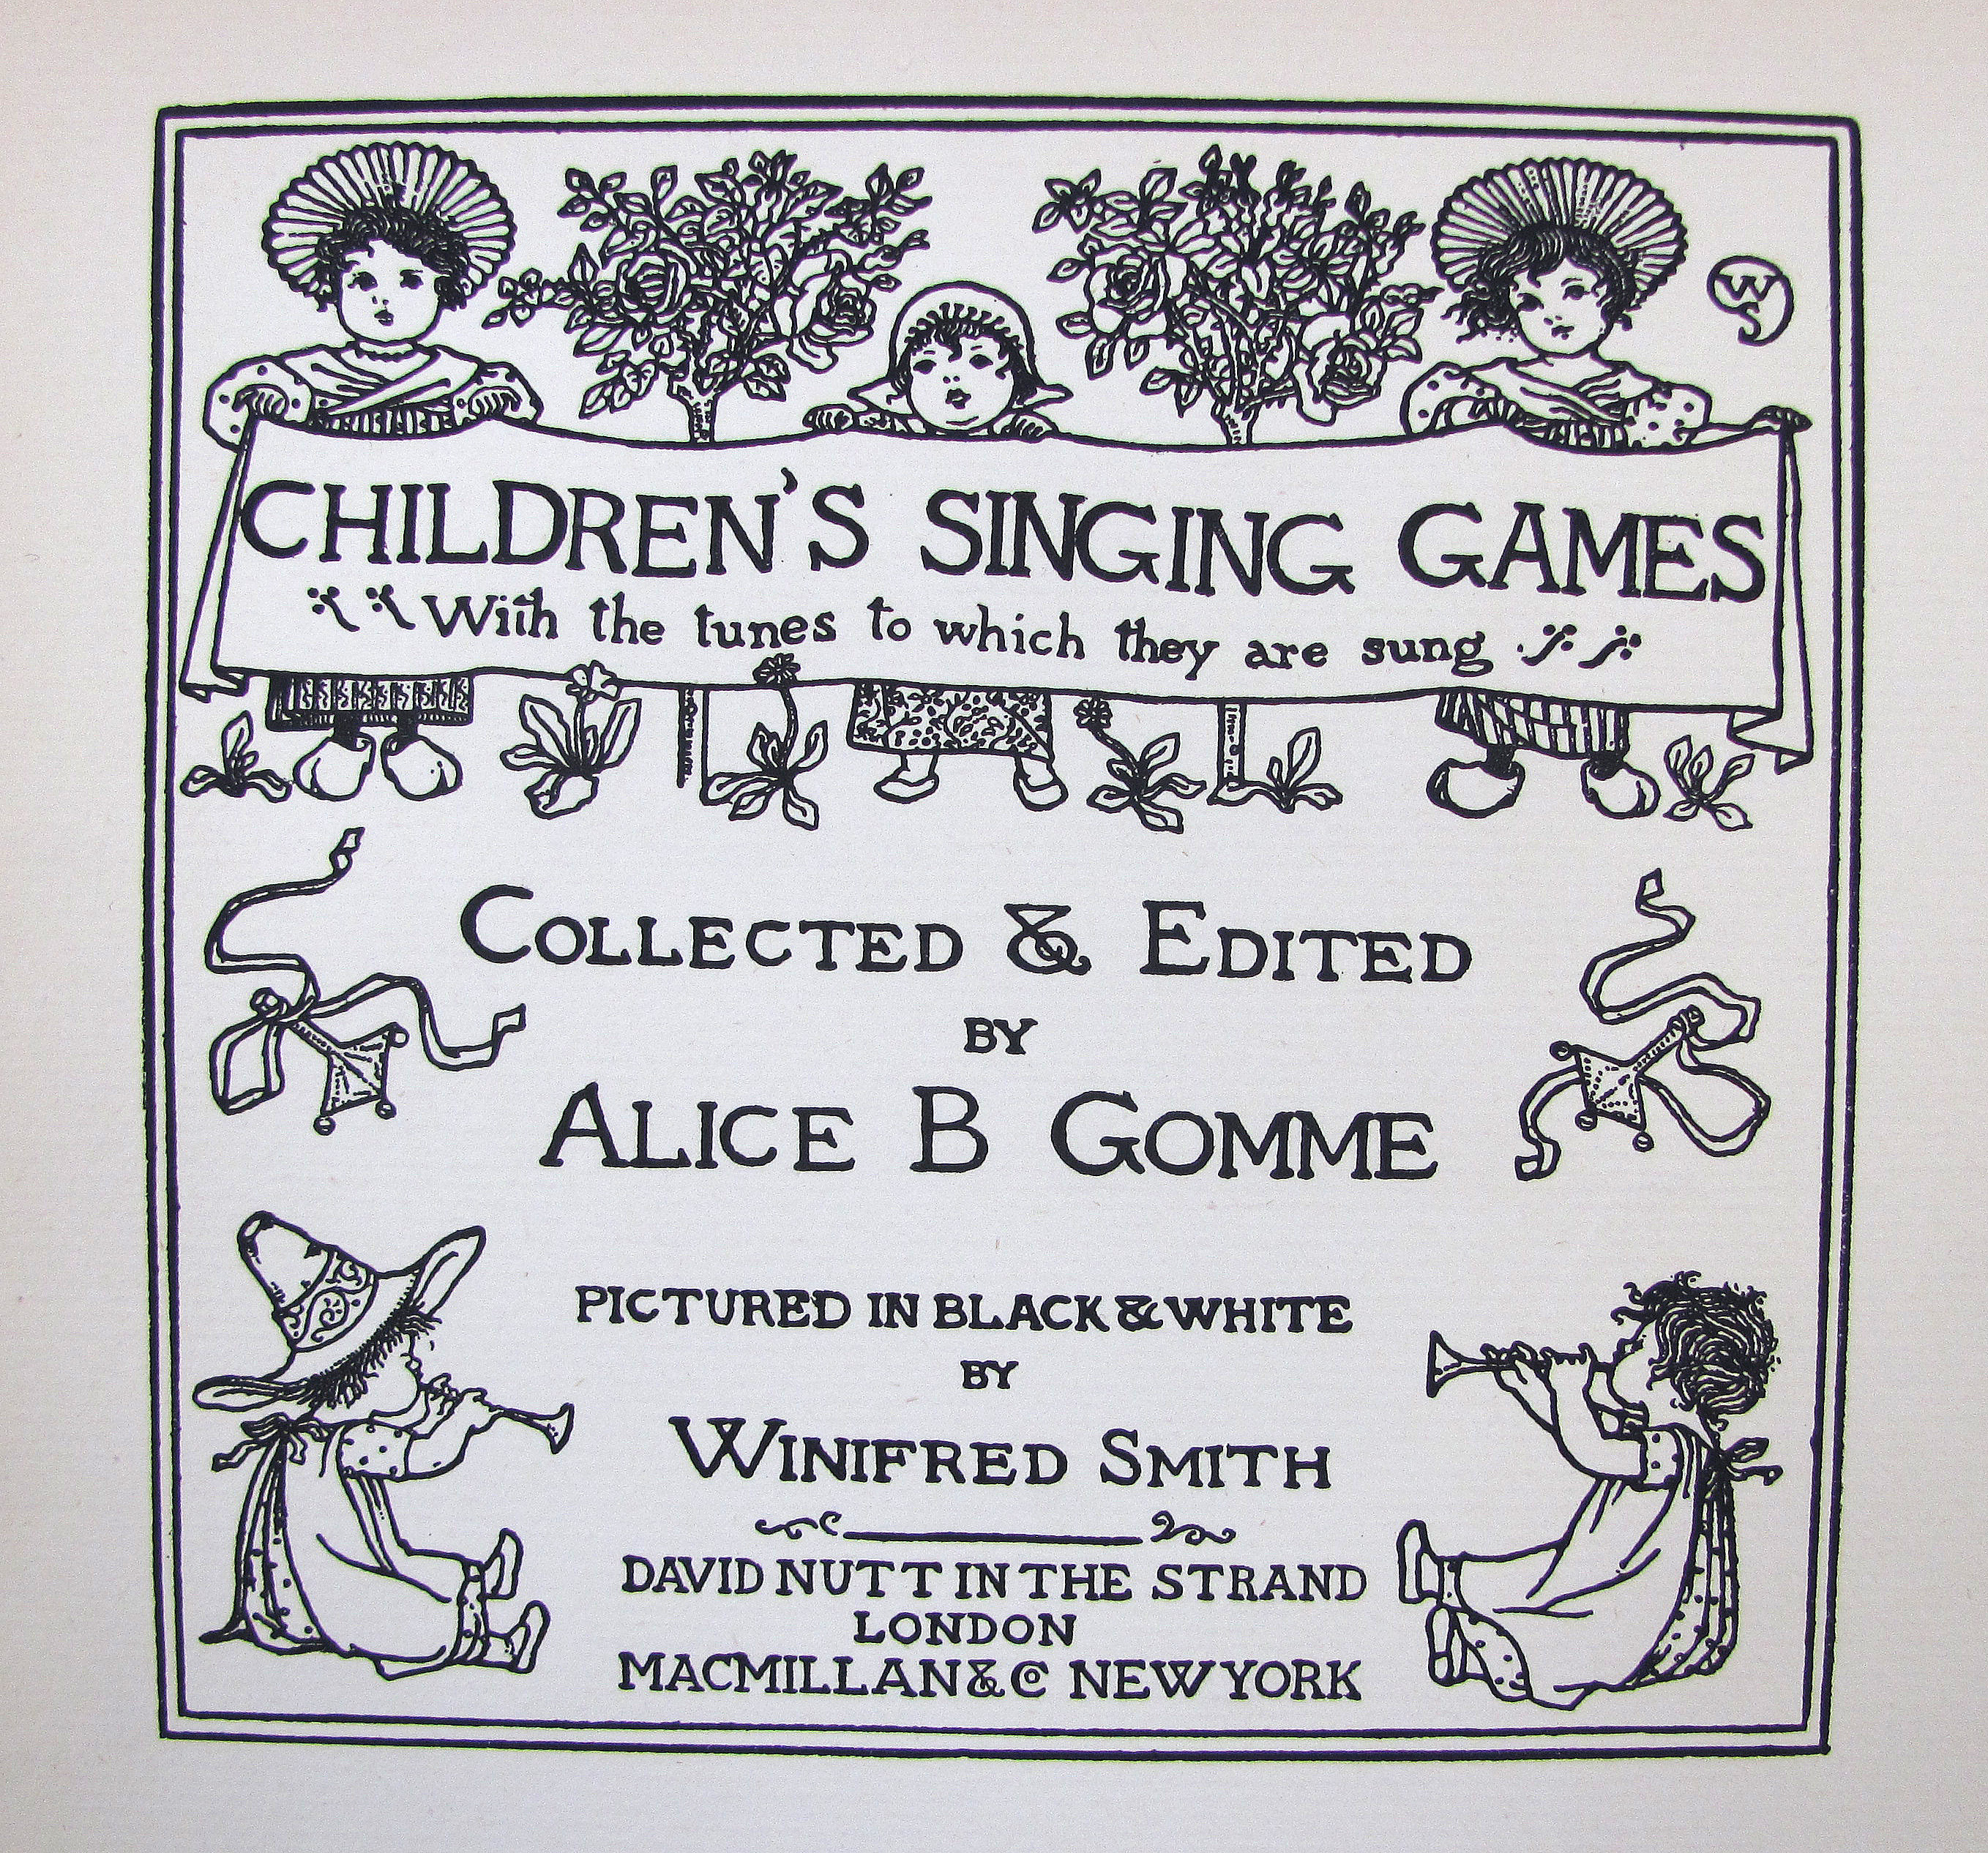 Gomme, Alice B., Children’s singing games. With the tunes to which they are sung. Pictured in black & white by Winifred Smith.